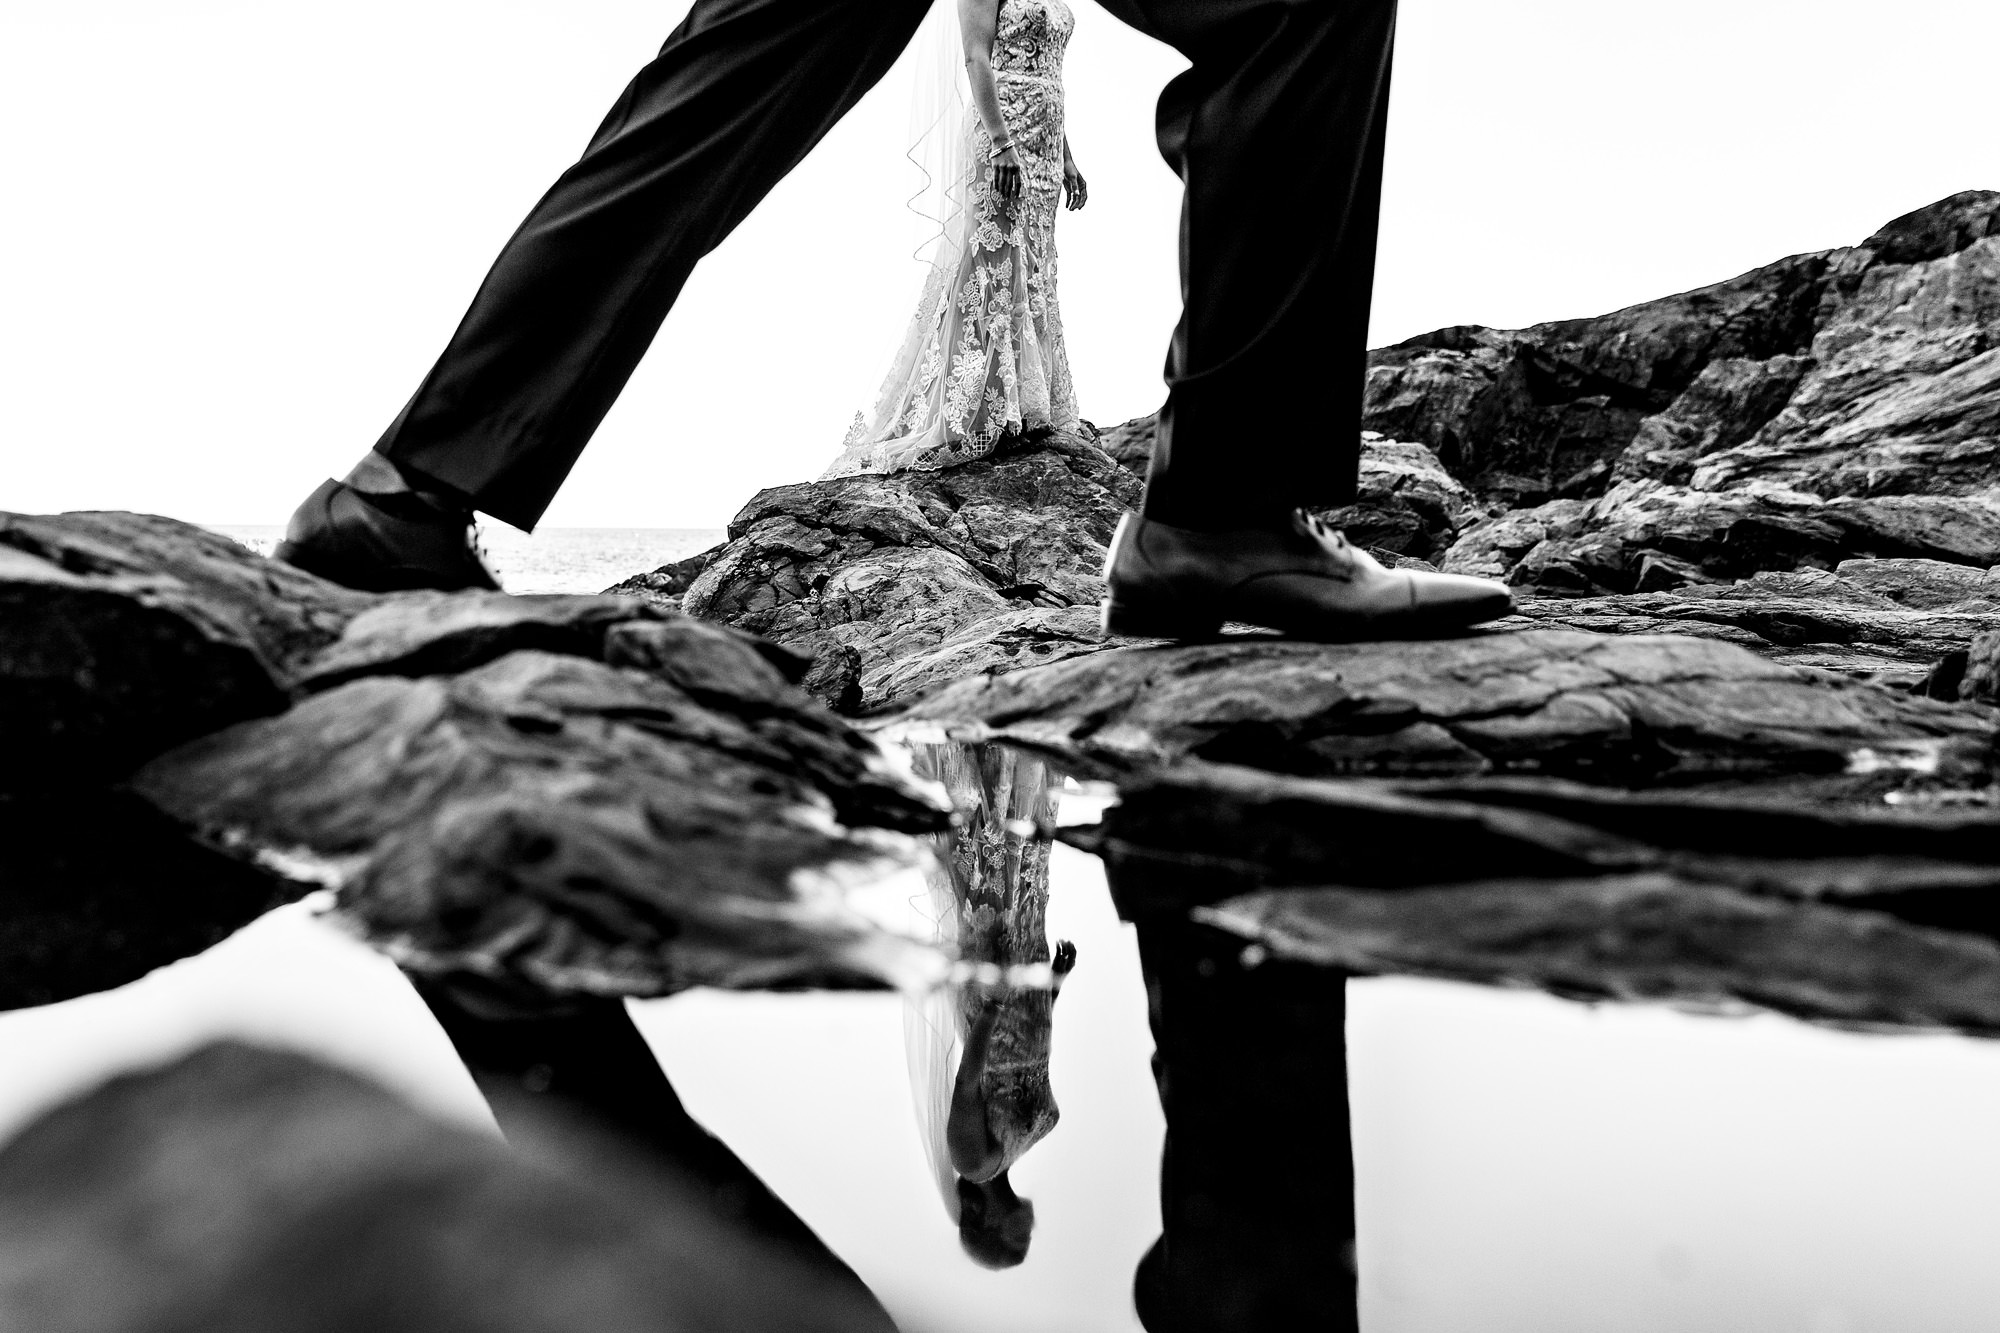 An abstract wedding portrait taken with the reflection of a tidal pool.